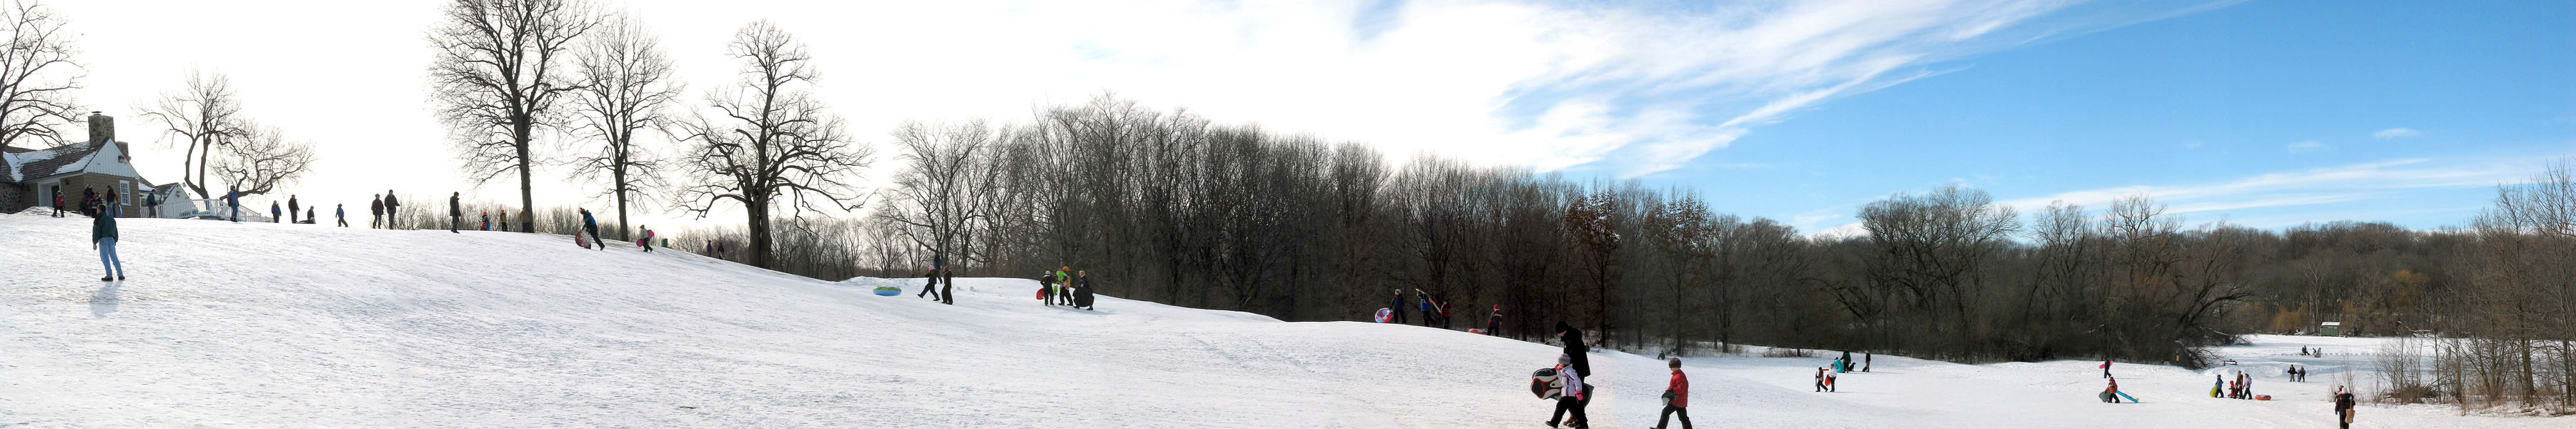 Sledding at Whitnal County Park clubhouse on a sunny day